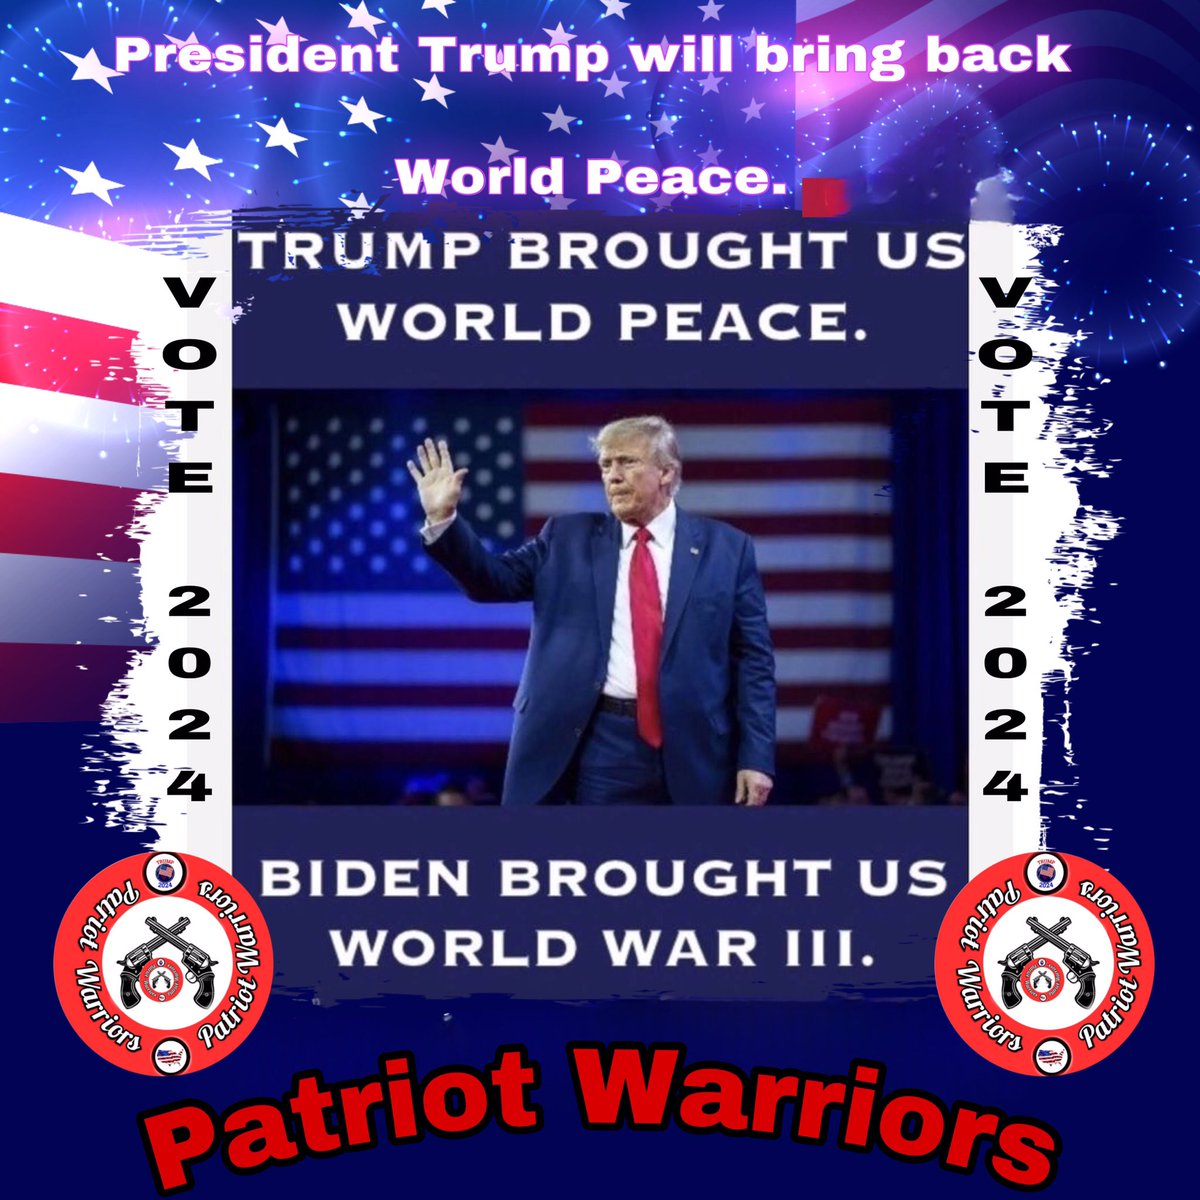 @UPMHPM @827js @cmir_r @th1_thr1 @MrClean00007 @WenMaMa2 @Investigator_50 @TommyStrand7 @satansradio666 @x4Eileen @DebForTrump2024 @Destiny15_FL @gailsline @Gapeach_3102 @ArchKennedy @BobFighter45 @CathyLa10001258 @HoseMonster2024 @franklytell 💥Thanks For The Ride 💥     
💥Likes& Retweeted💥
💥Please Follow 👉👉@UPMHPM
💥Join Patriot Warriors Today- Contact Me At 👉👉@TJ_Patriot1💥